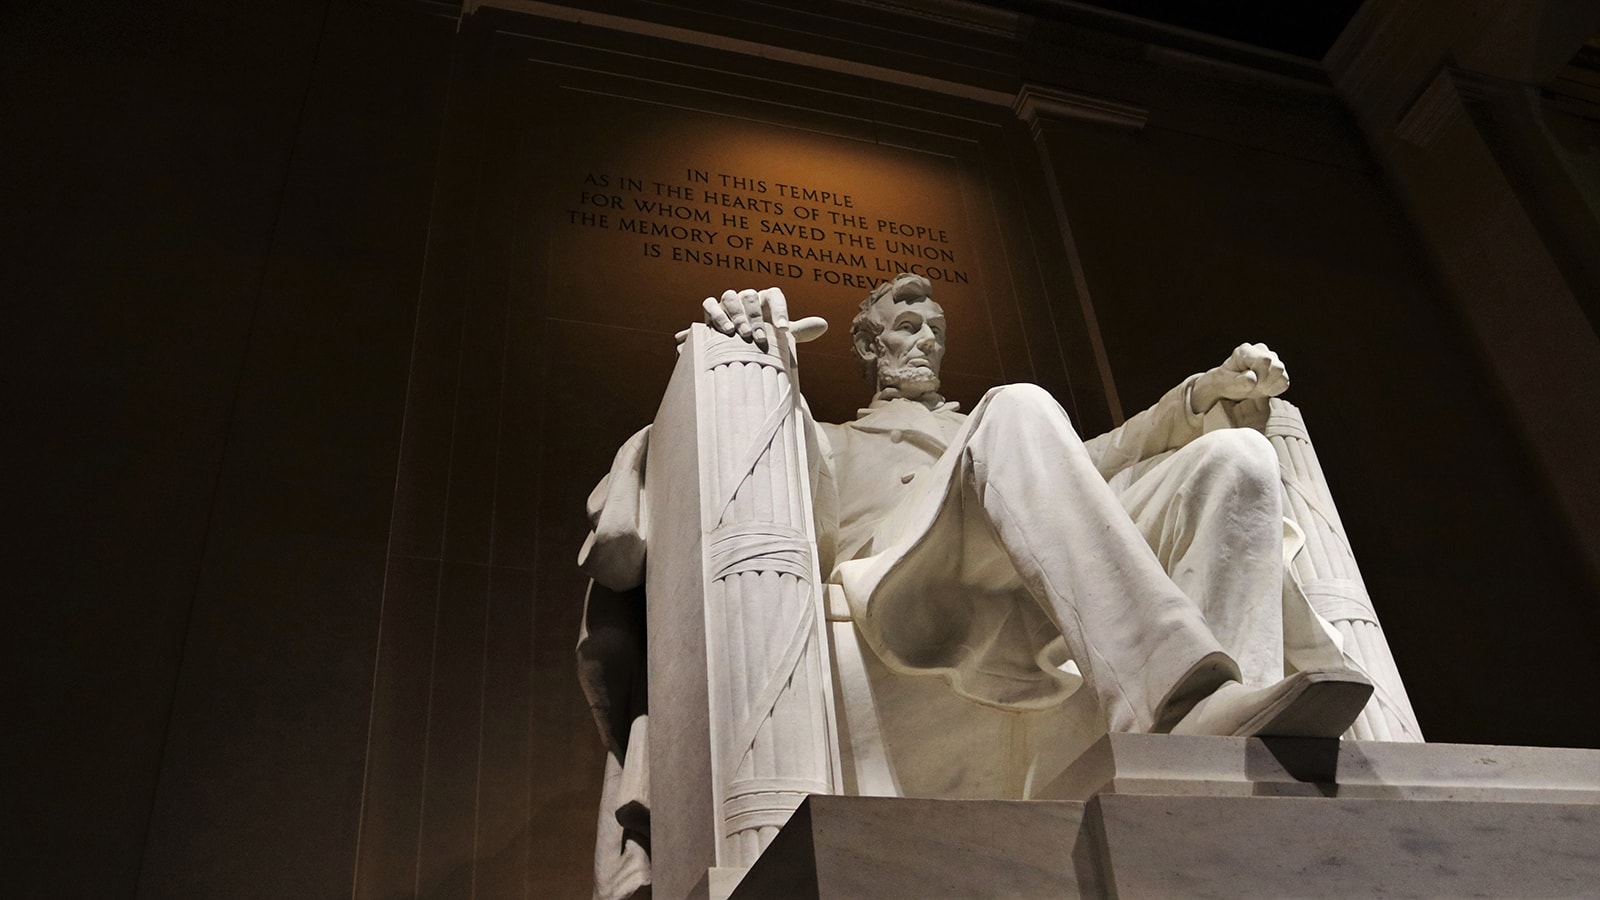 Photograph of the Statue of Abraham Lincoln at the Lincoln Memorial